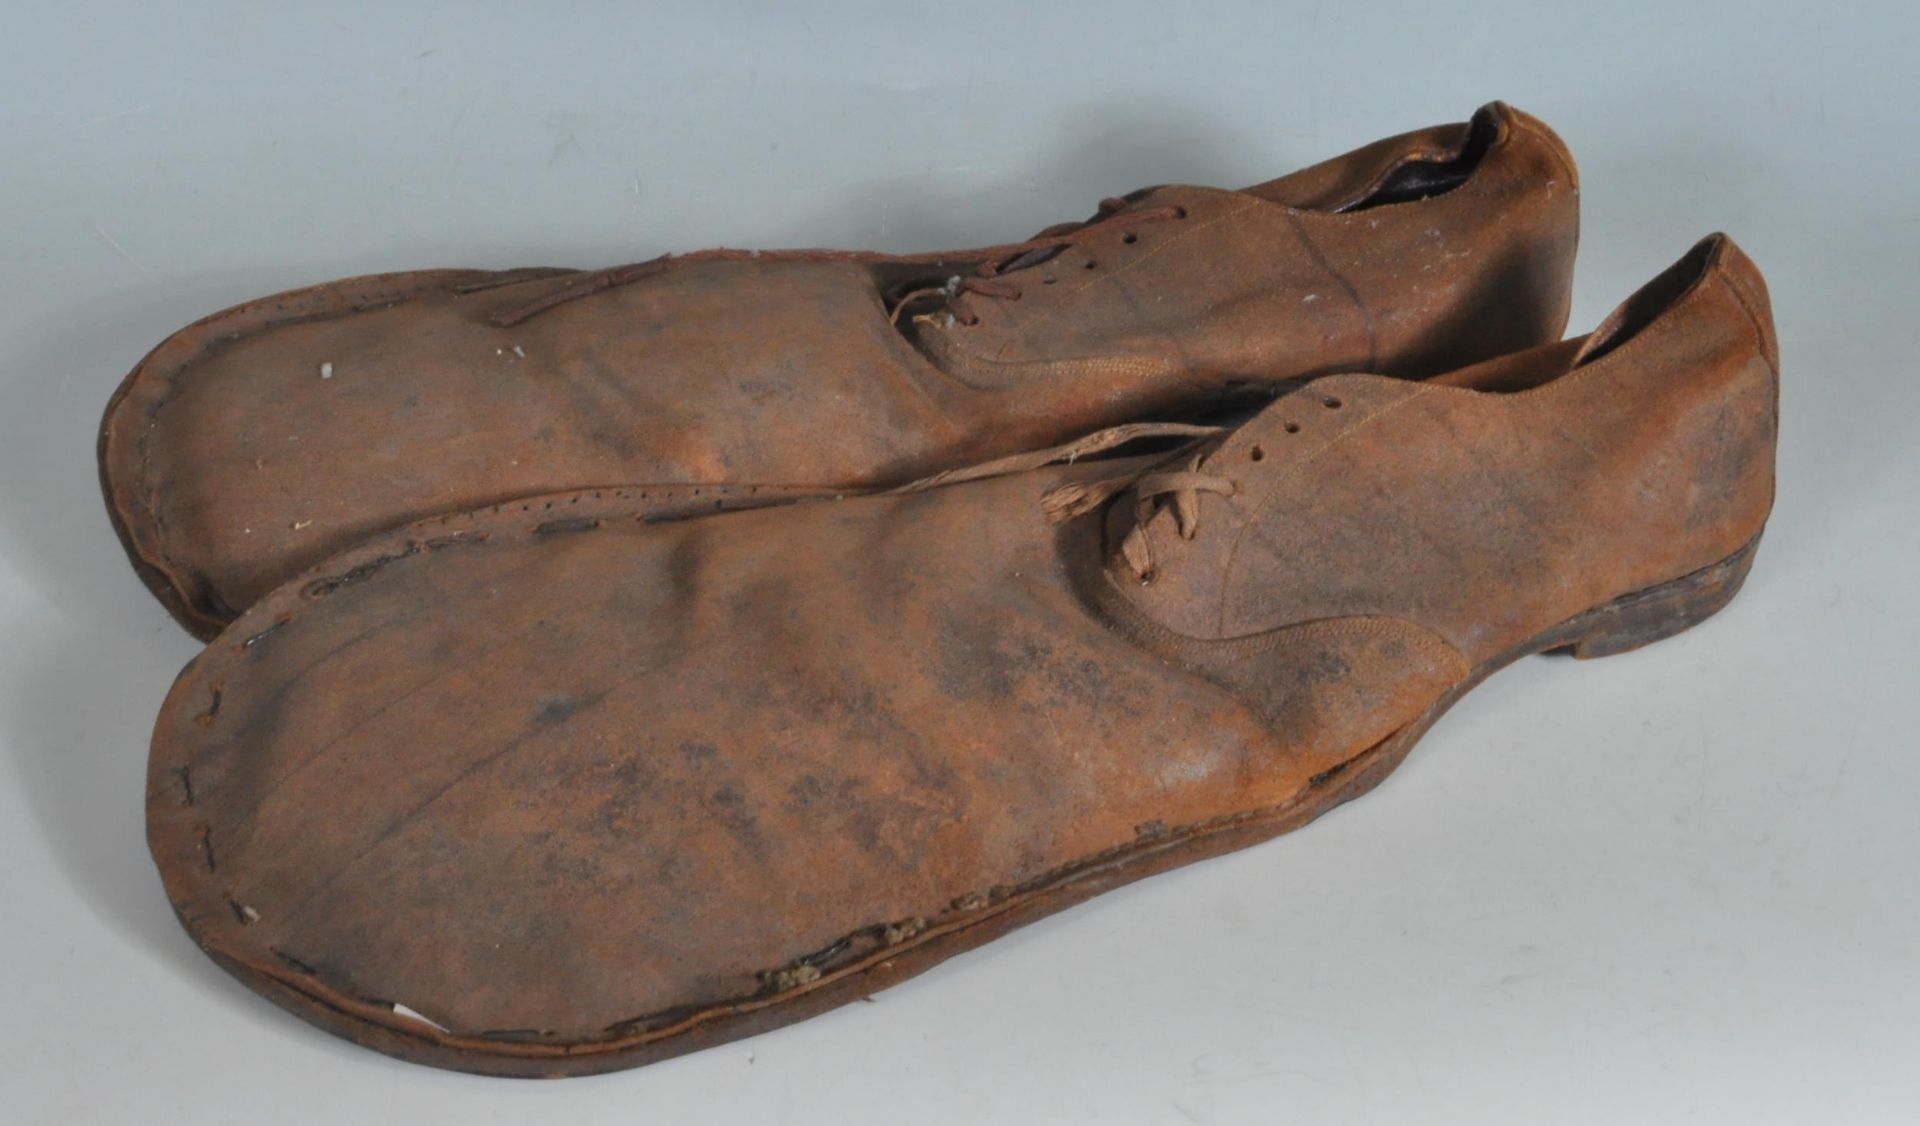 UNUSUAL LARGE PAIR OF 19TH CENTURY CIRCUS CLOWN SHOES